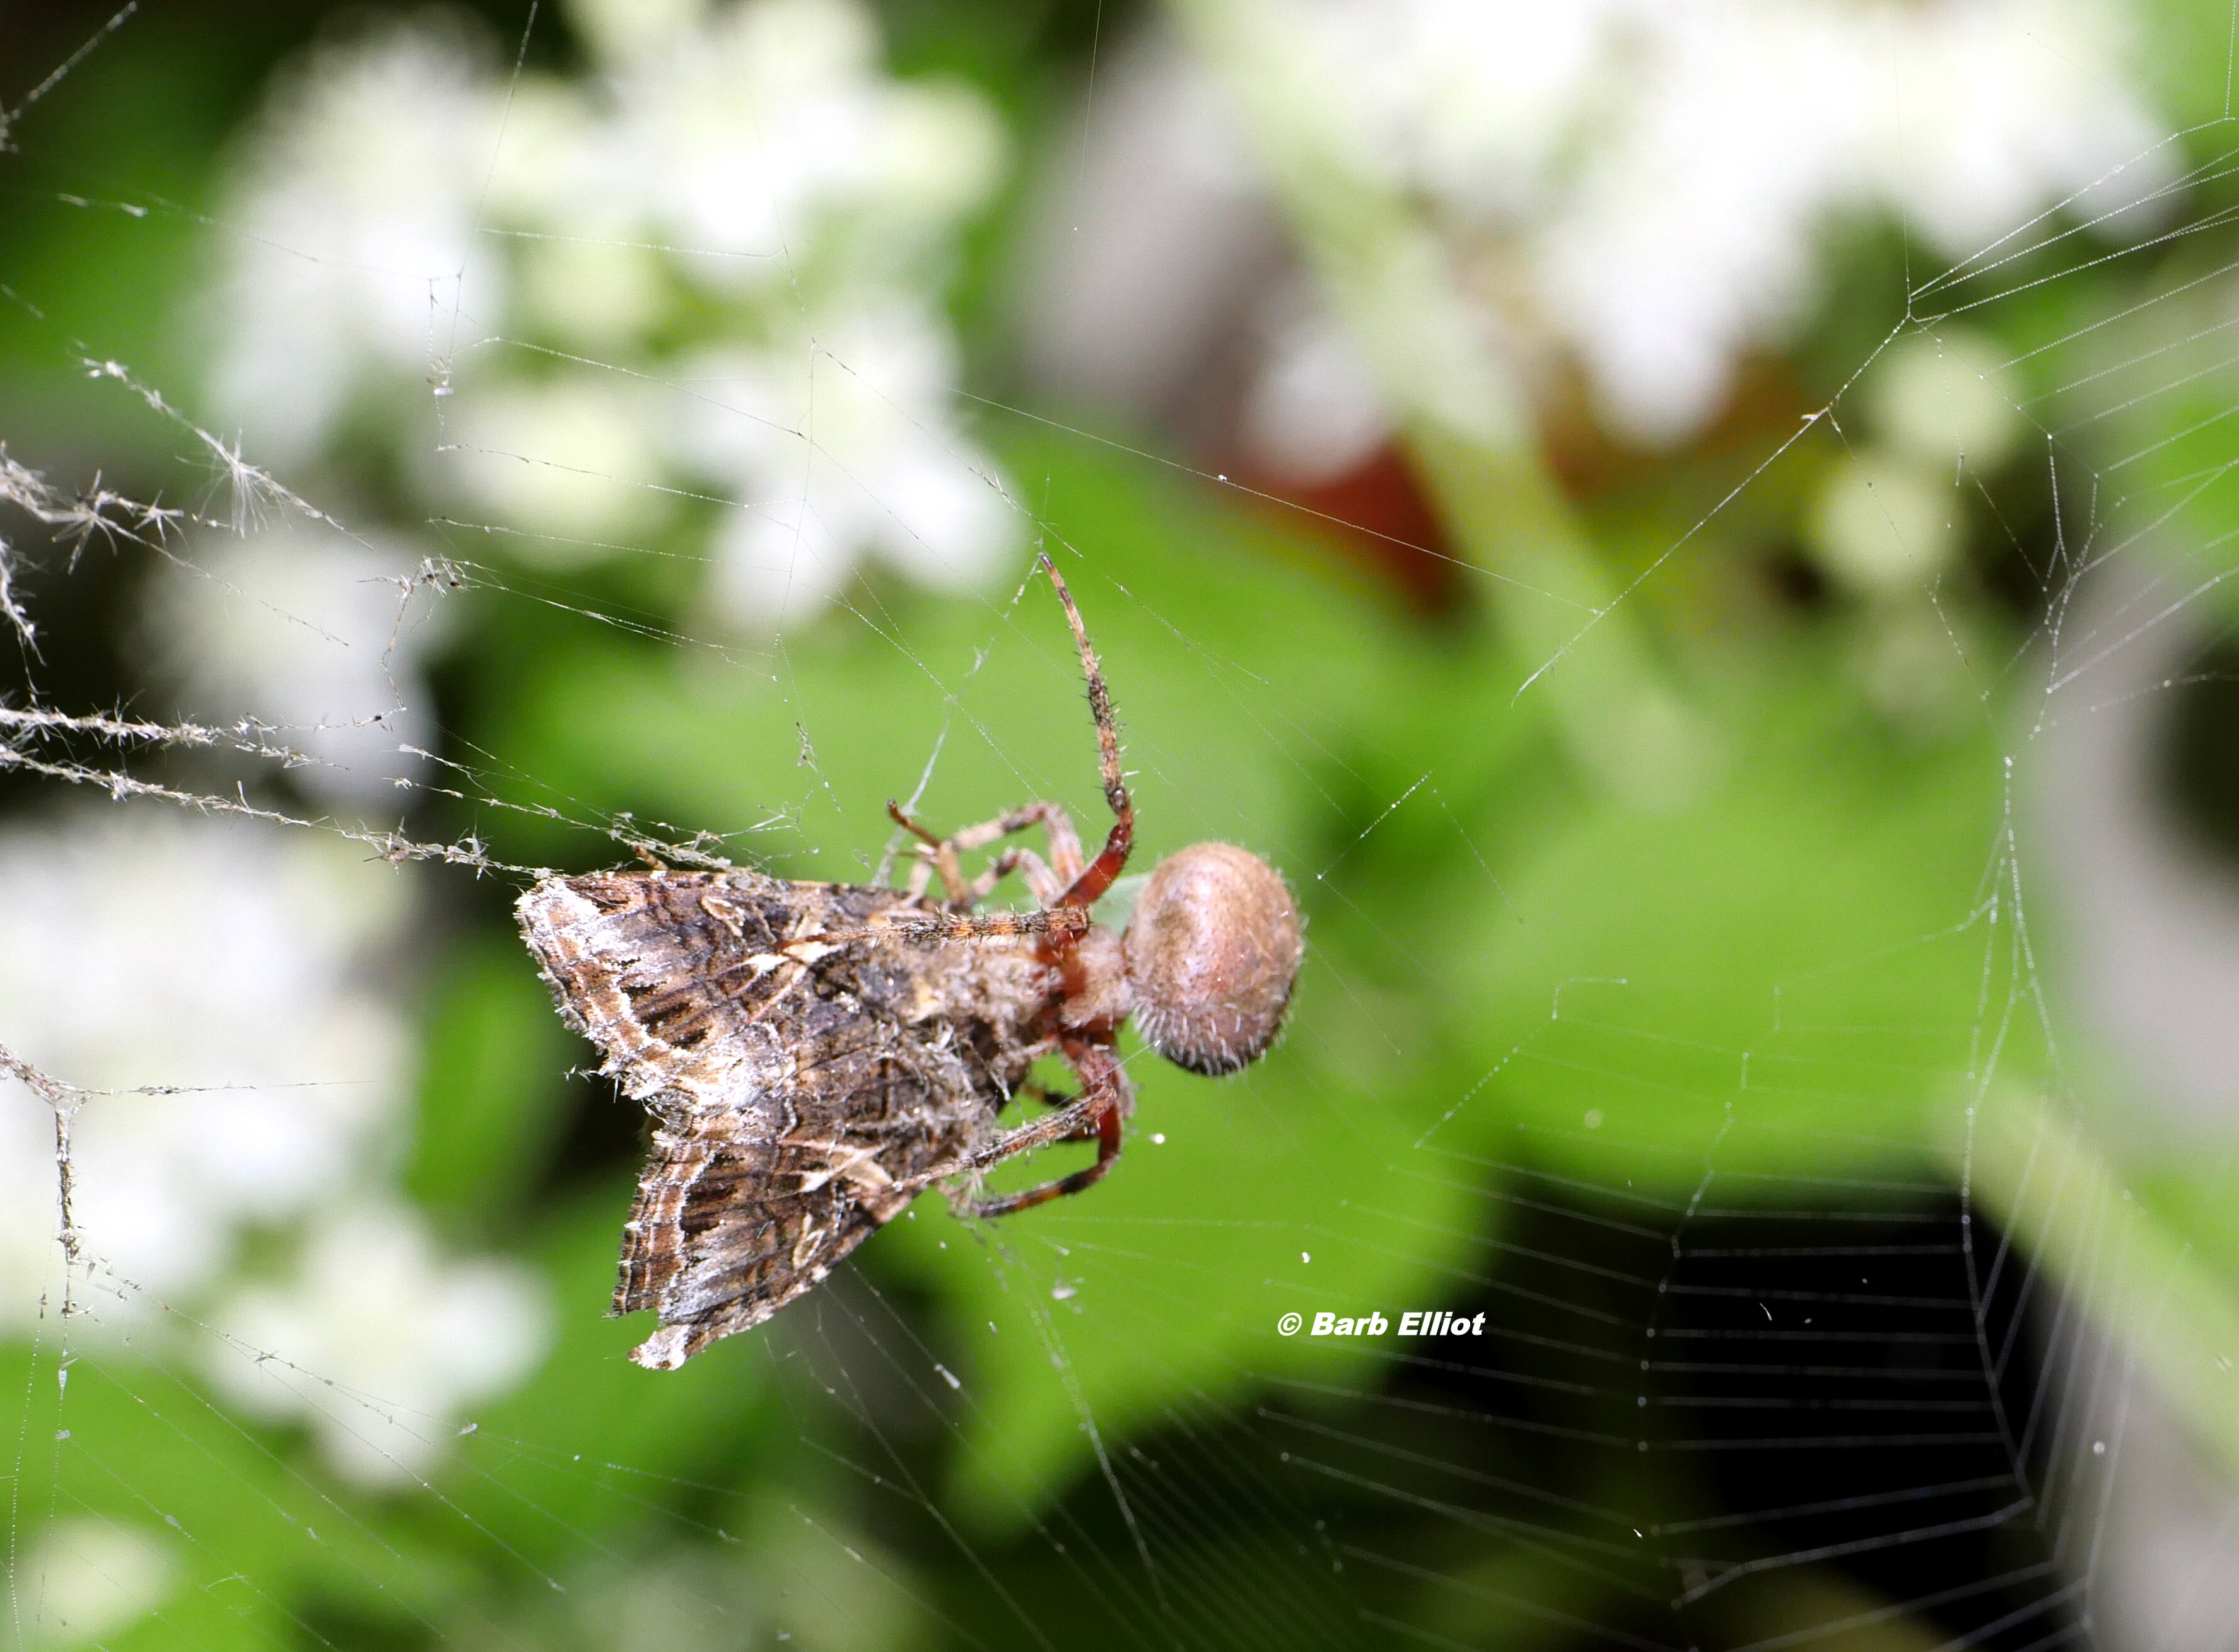 Spotted Orb Weaver (Neoscona crucifera) spider quickly paralyzes a moth that flew into its web.  © Barb Elliot.  Click to enlarge.